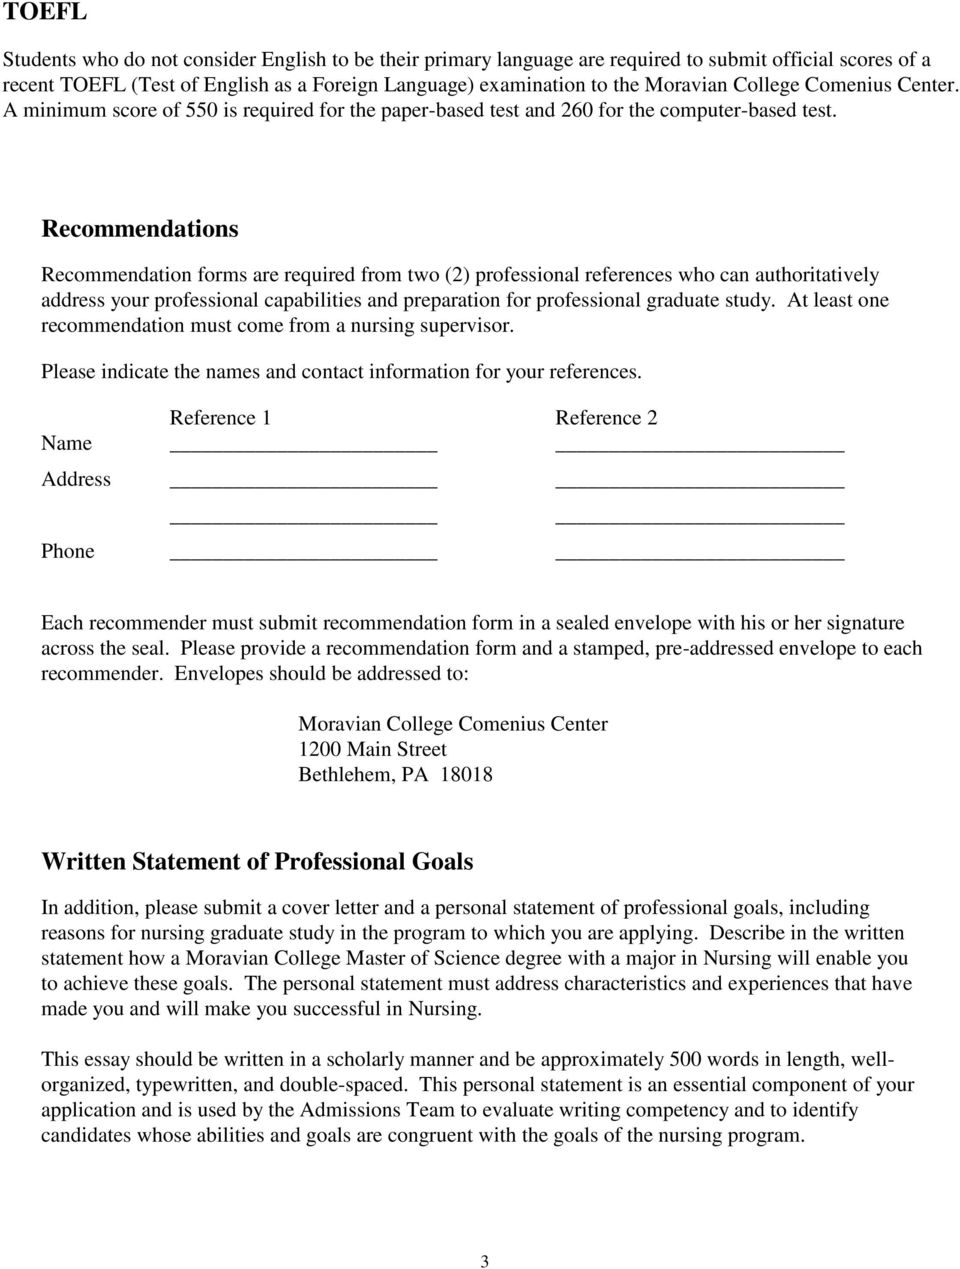 Recommendations Recommendation forms are required from two (2) professional references who can authoritatively address your professional capabilities and preparation for professional graduate study.